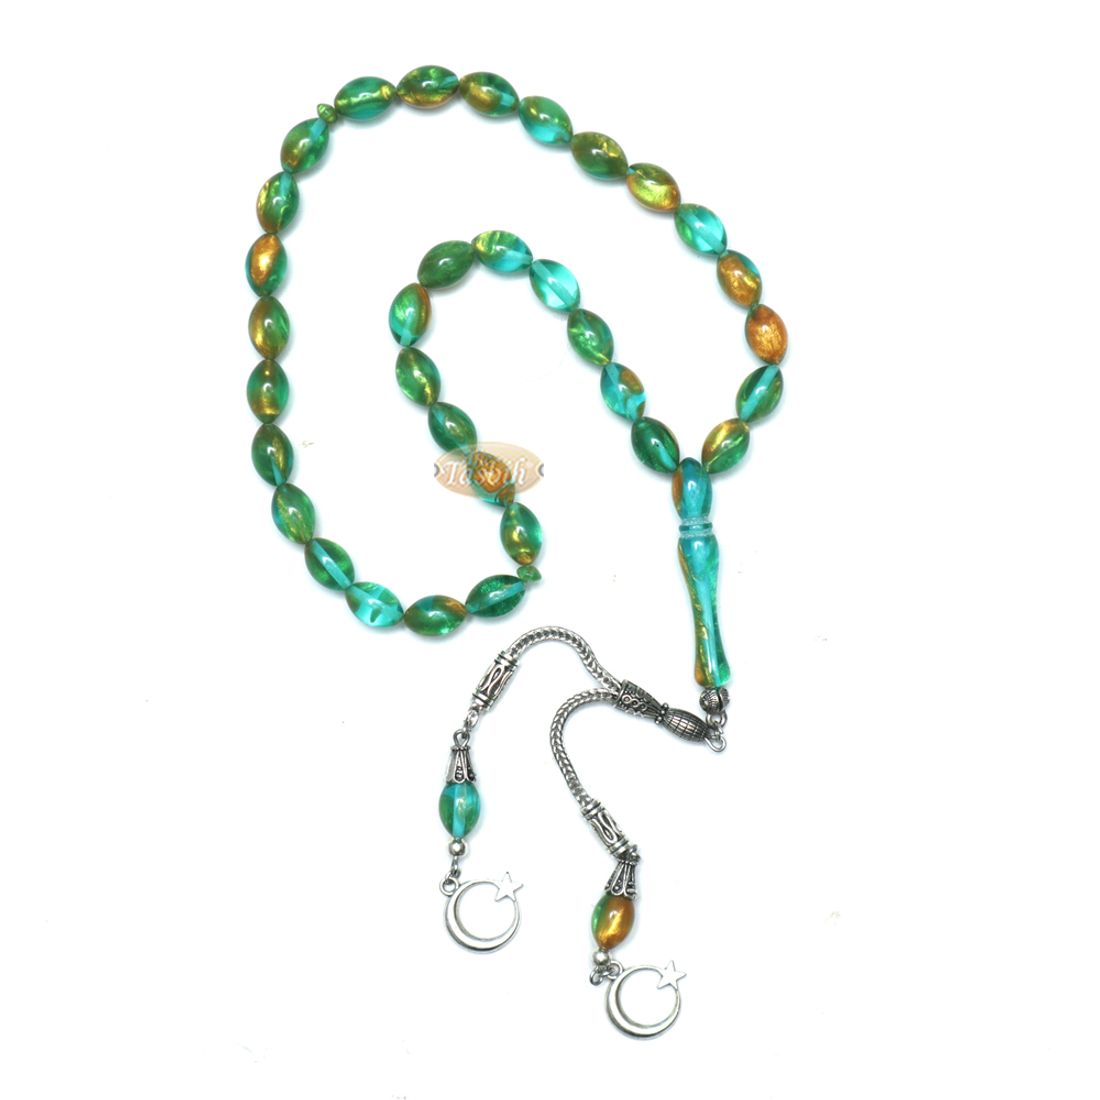 Islamic Prayer Beads Small 33-ct Tasbih 7×11-mm Oval Acrylic Translucent Marbled Turquoise Blue Green Gold from Konya Silver Kizilay Charms